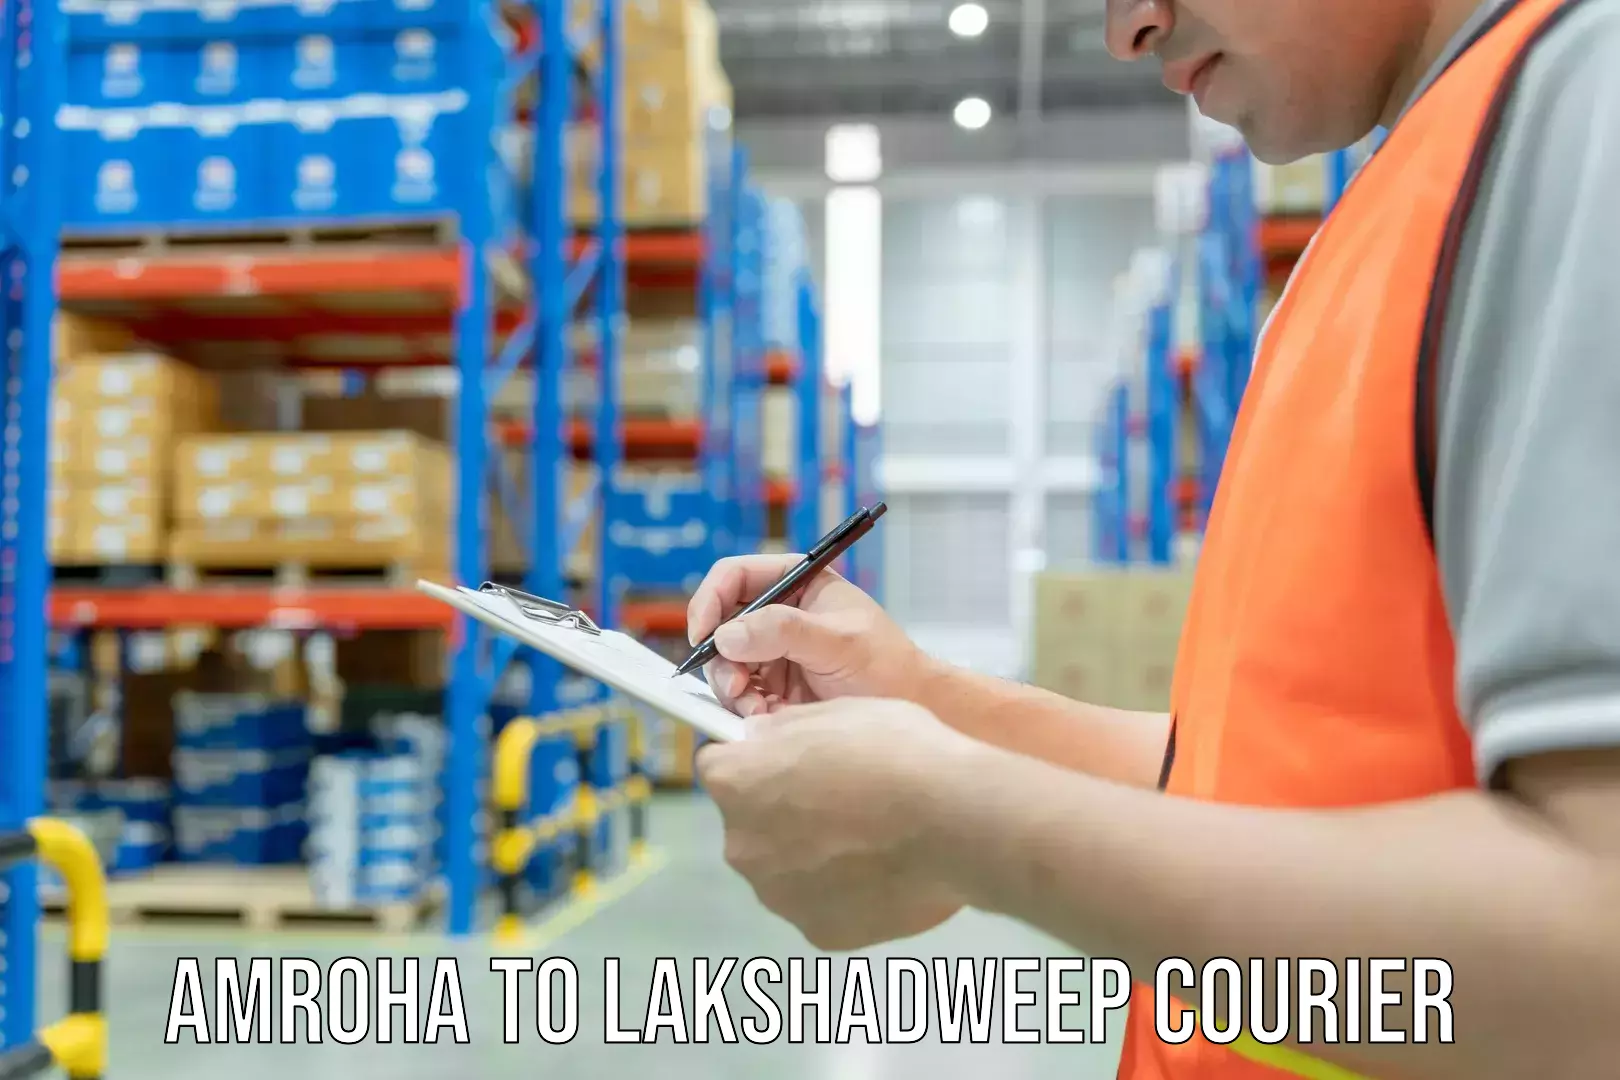 State-of-the-art courier technology Amroha to Lakshadweep